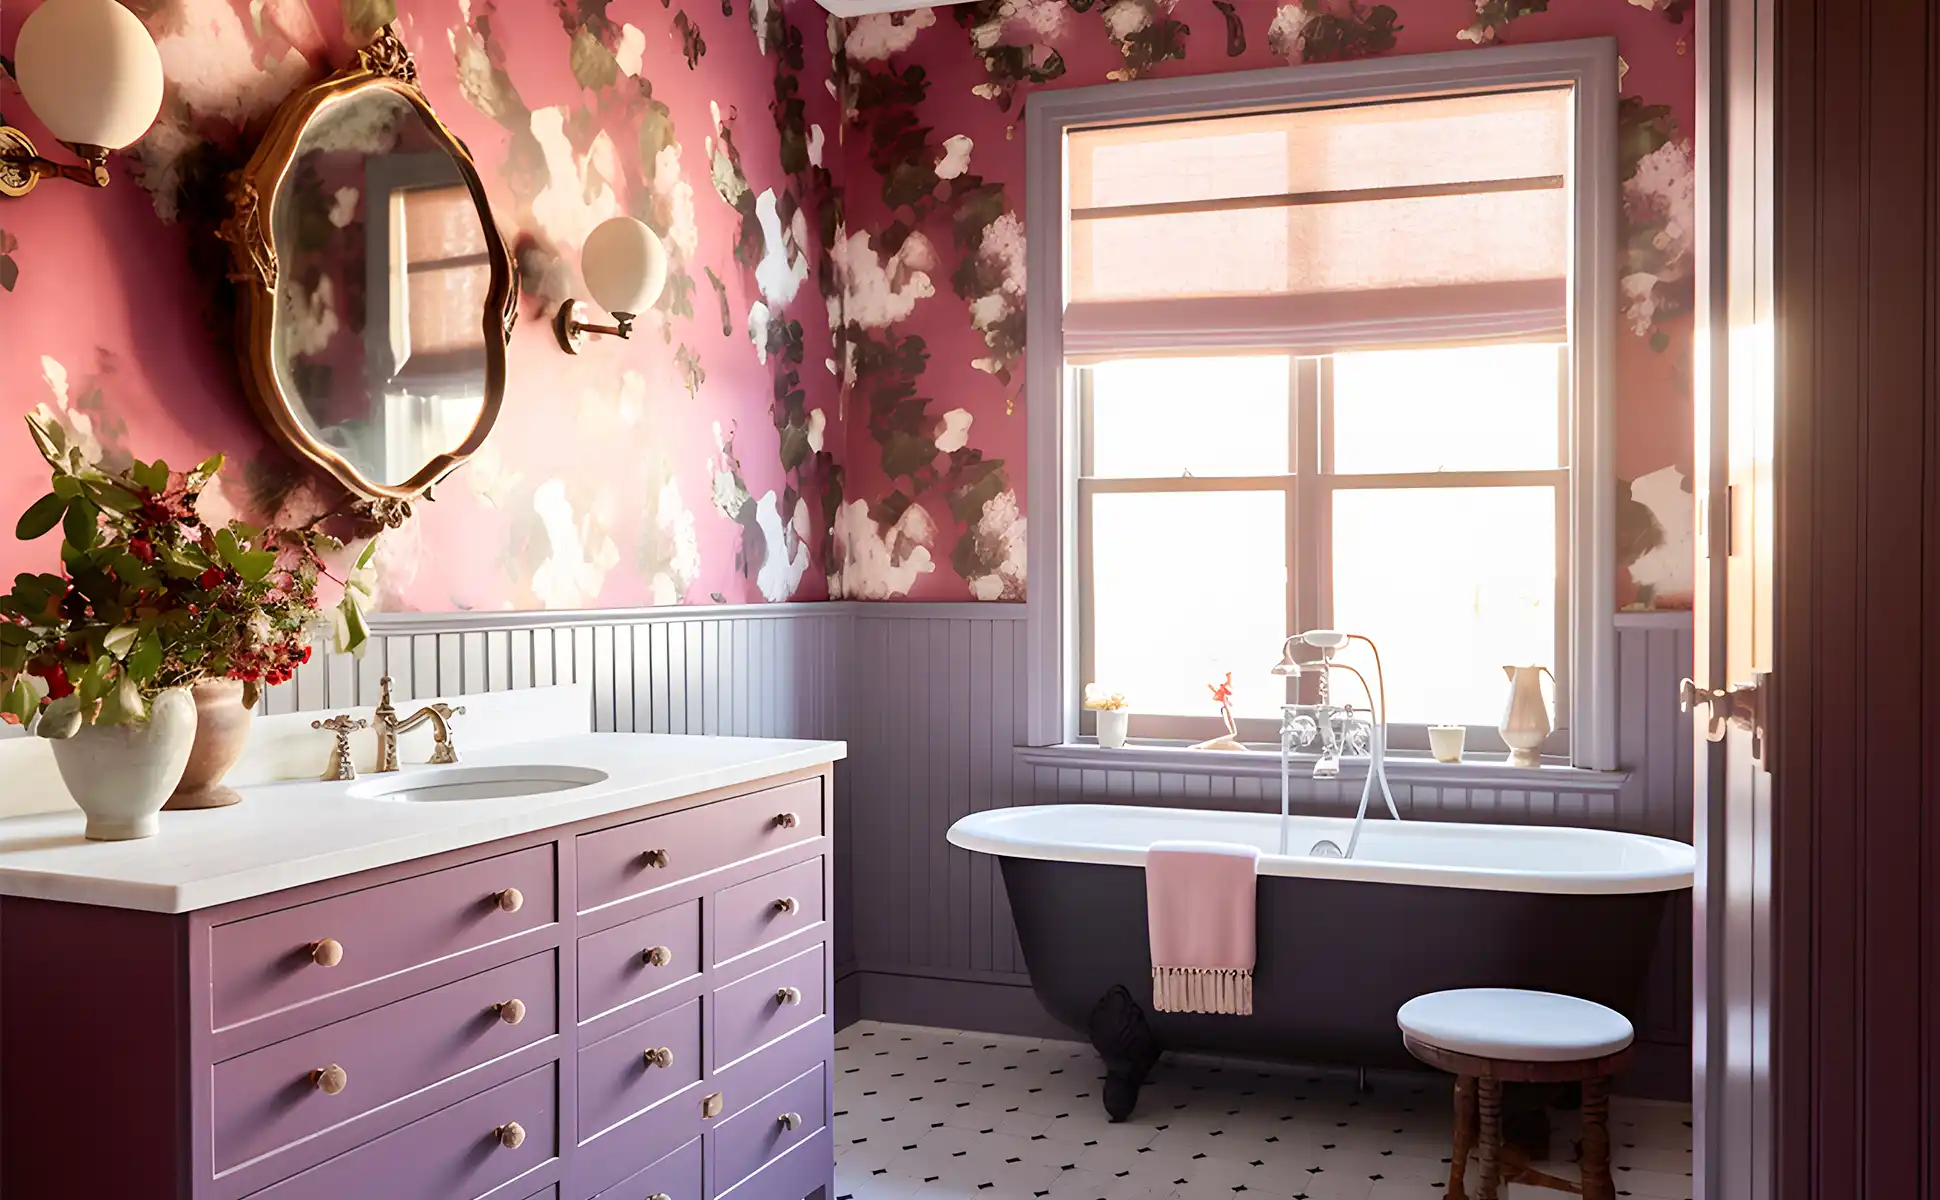 A bathroom with purple and floral wallpaper.